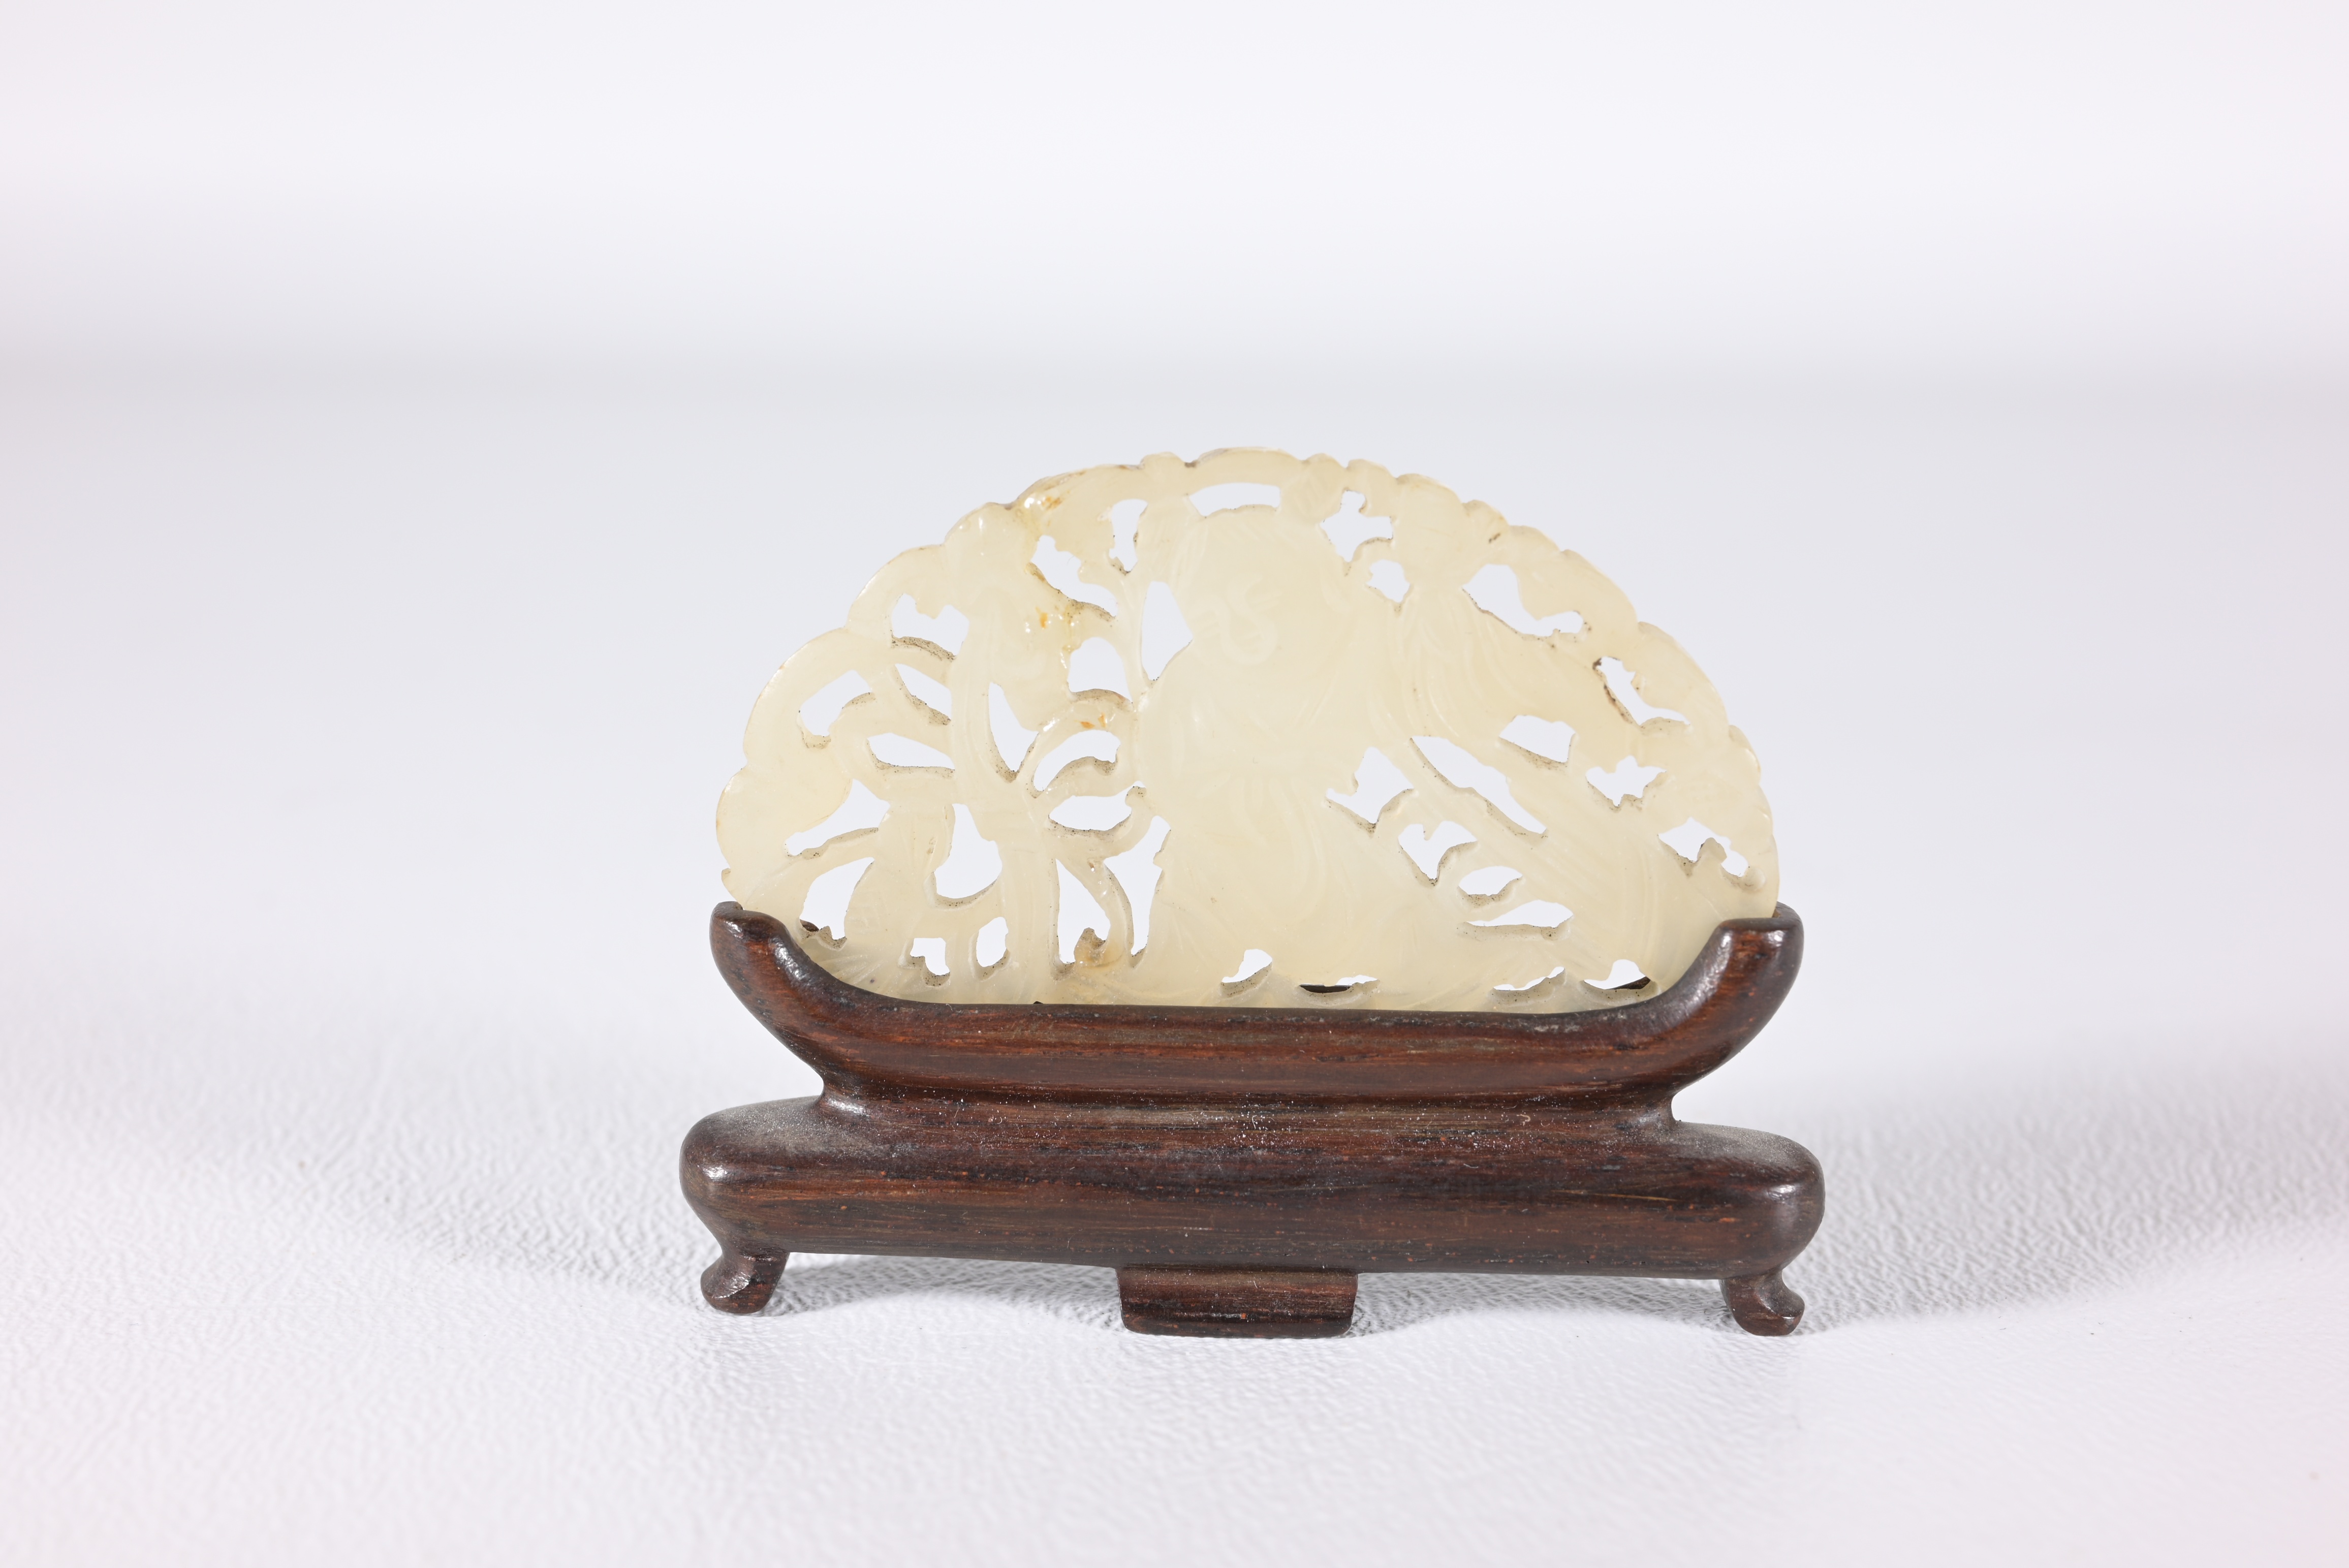 Antique Carved/Reticulated White Jade on Stand - Image 3 of 4